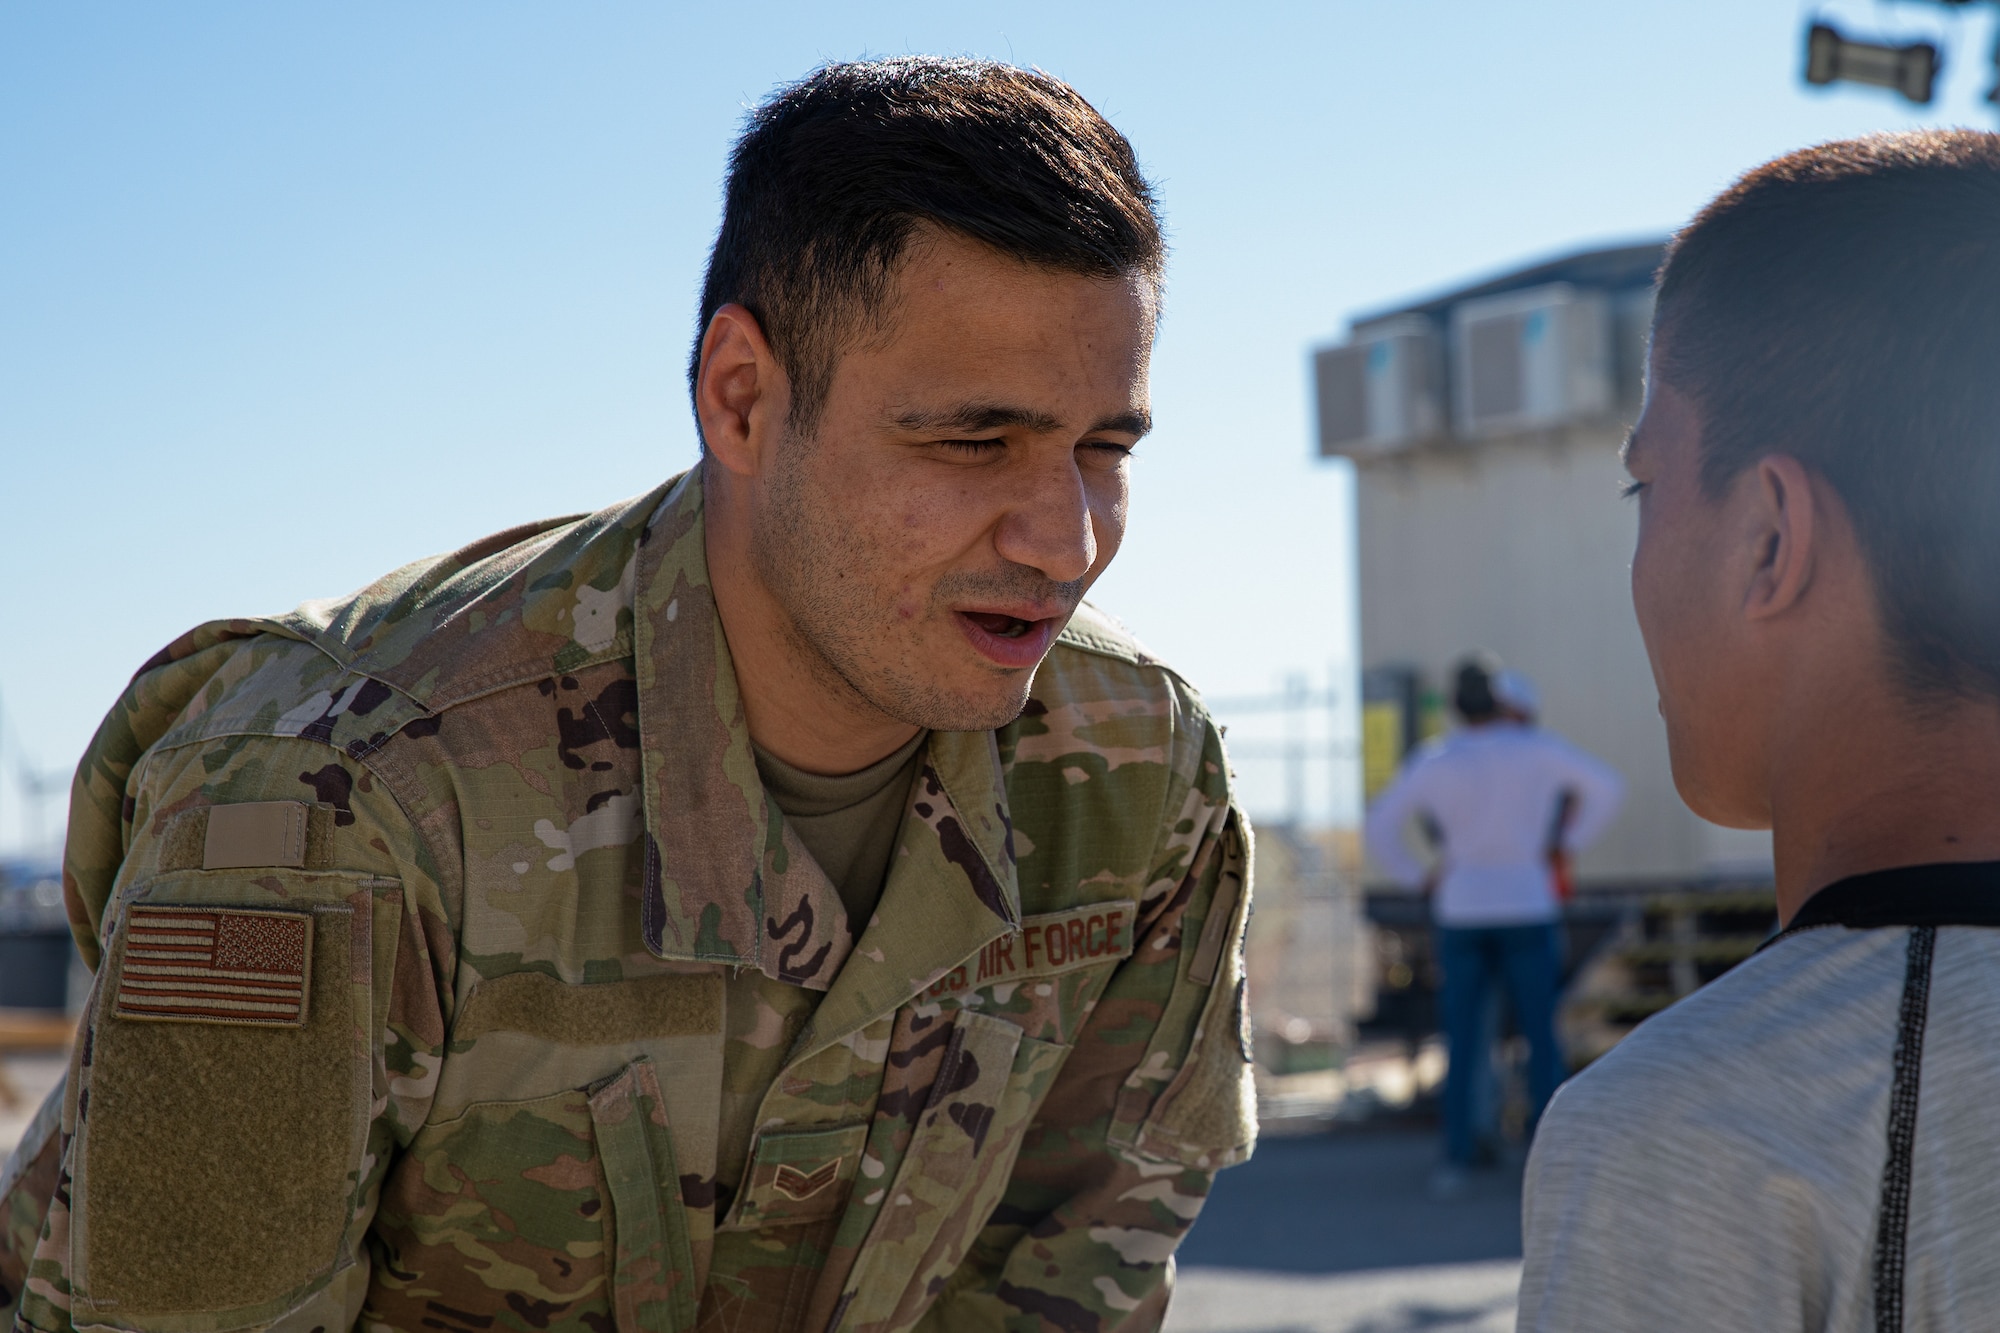 Photo of Senior Airman Kalimullah Ghorbandi, a linguist assigned to Task Force Holloman, interacting with an Afghan child at Aman Omid Village on Holloman Air Force Base.